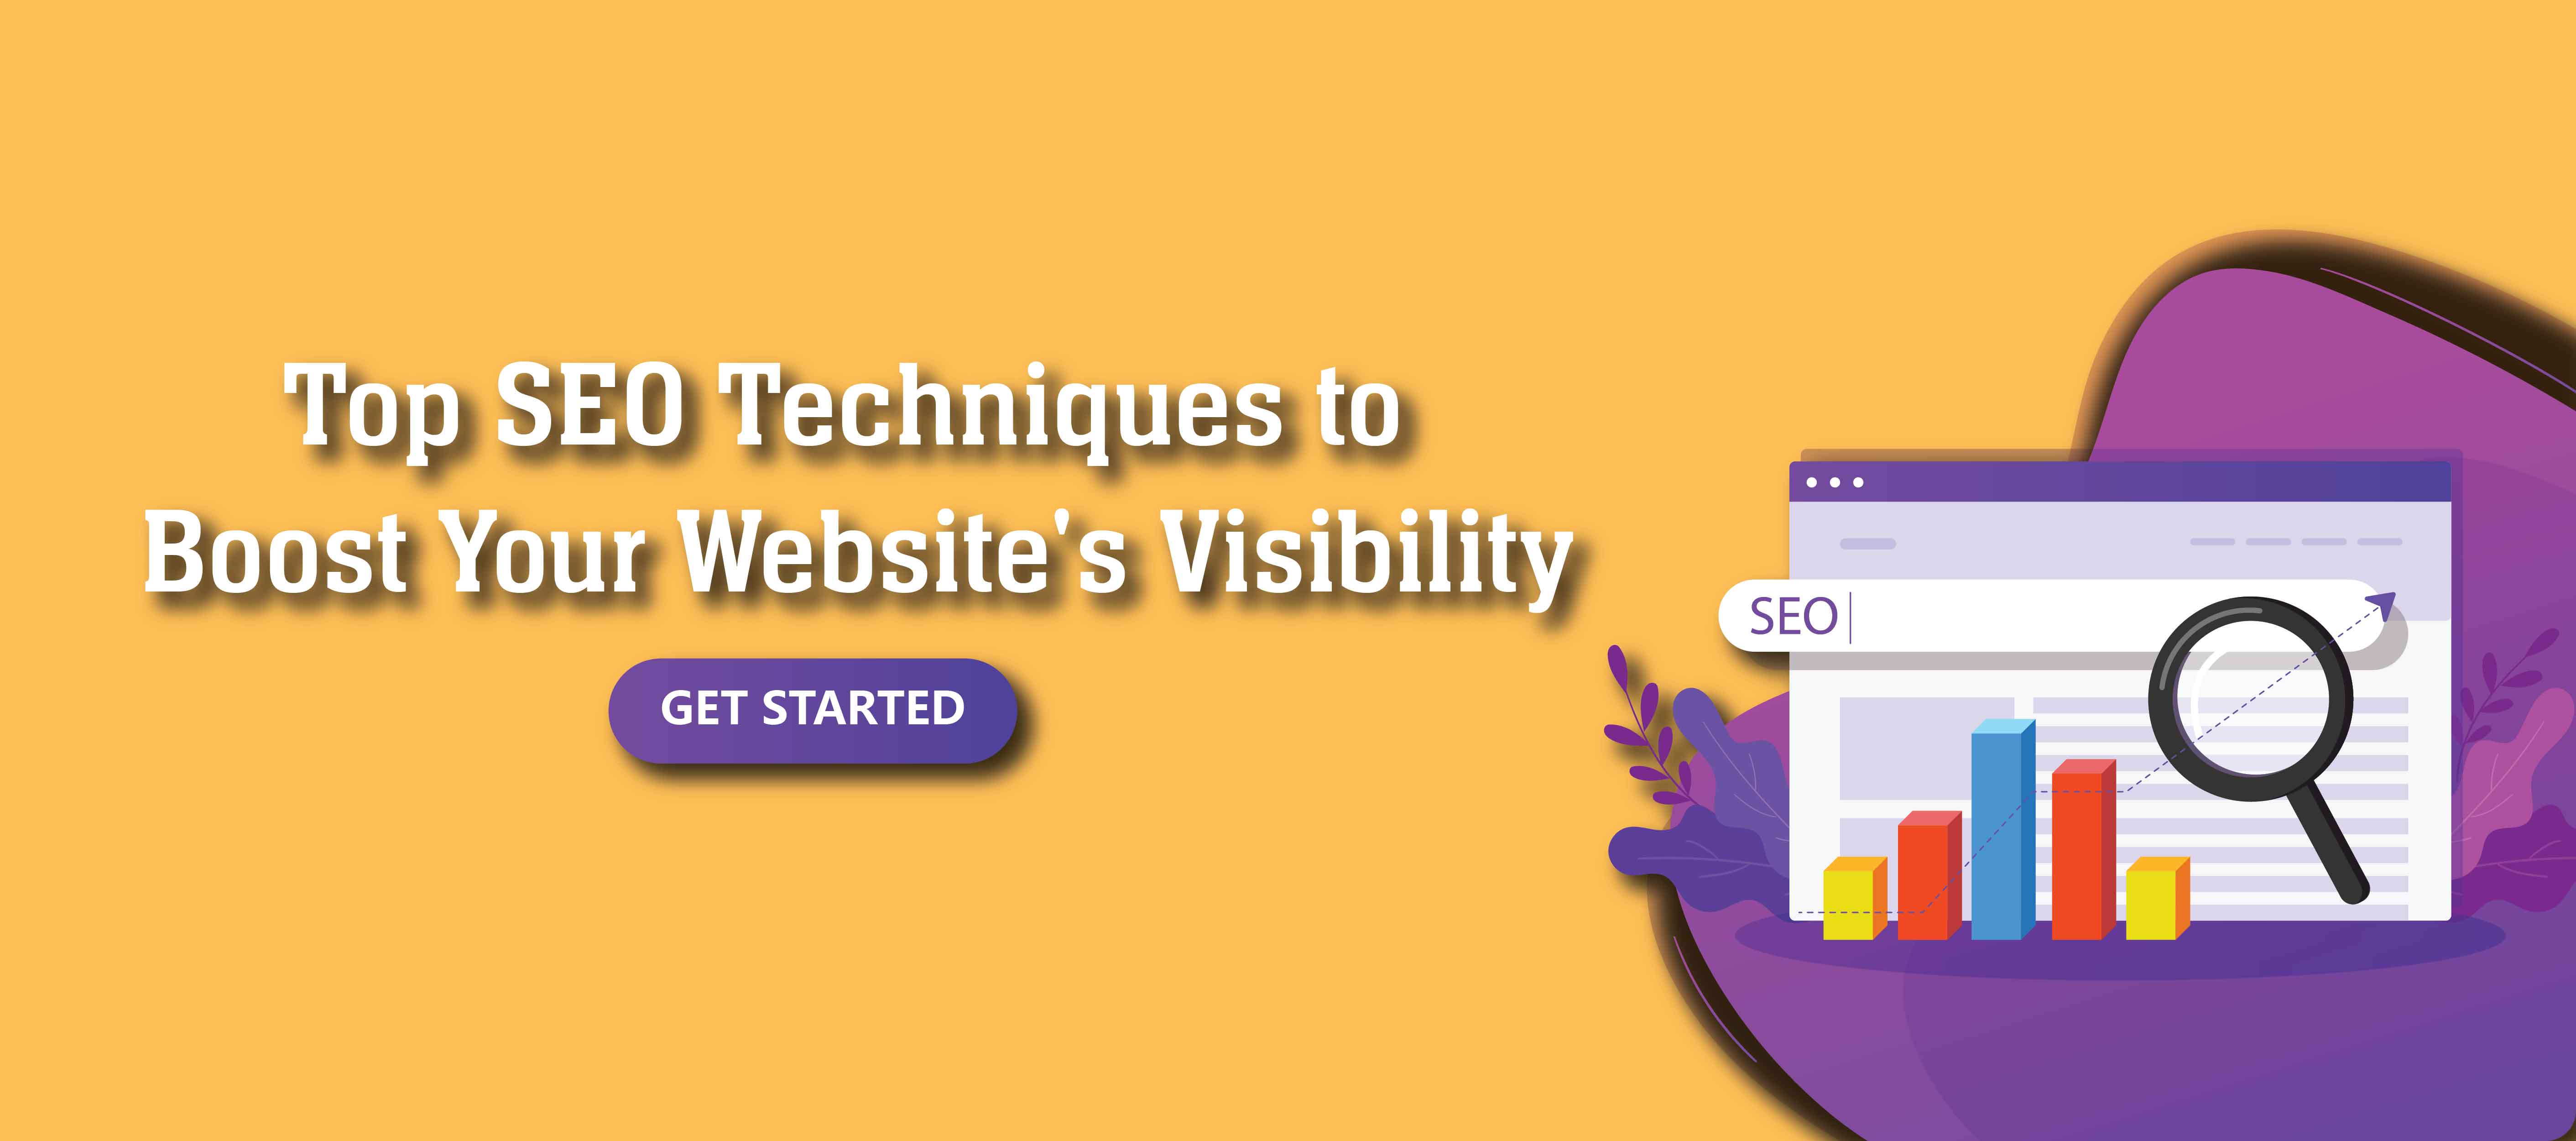 Top SEO Techniques to Boost Your Website's Visibility